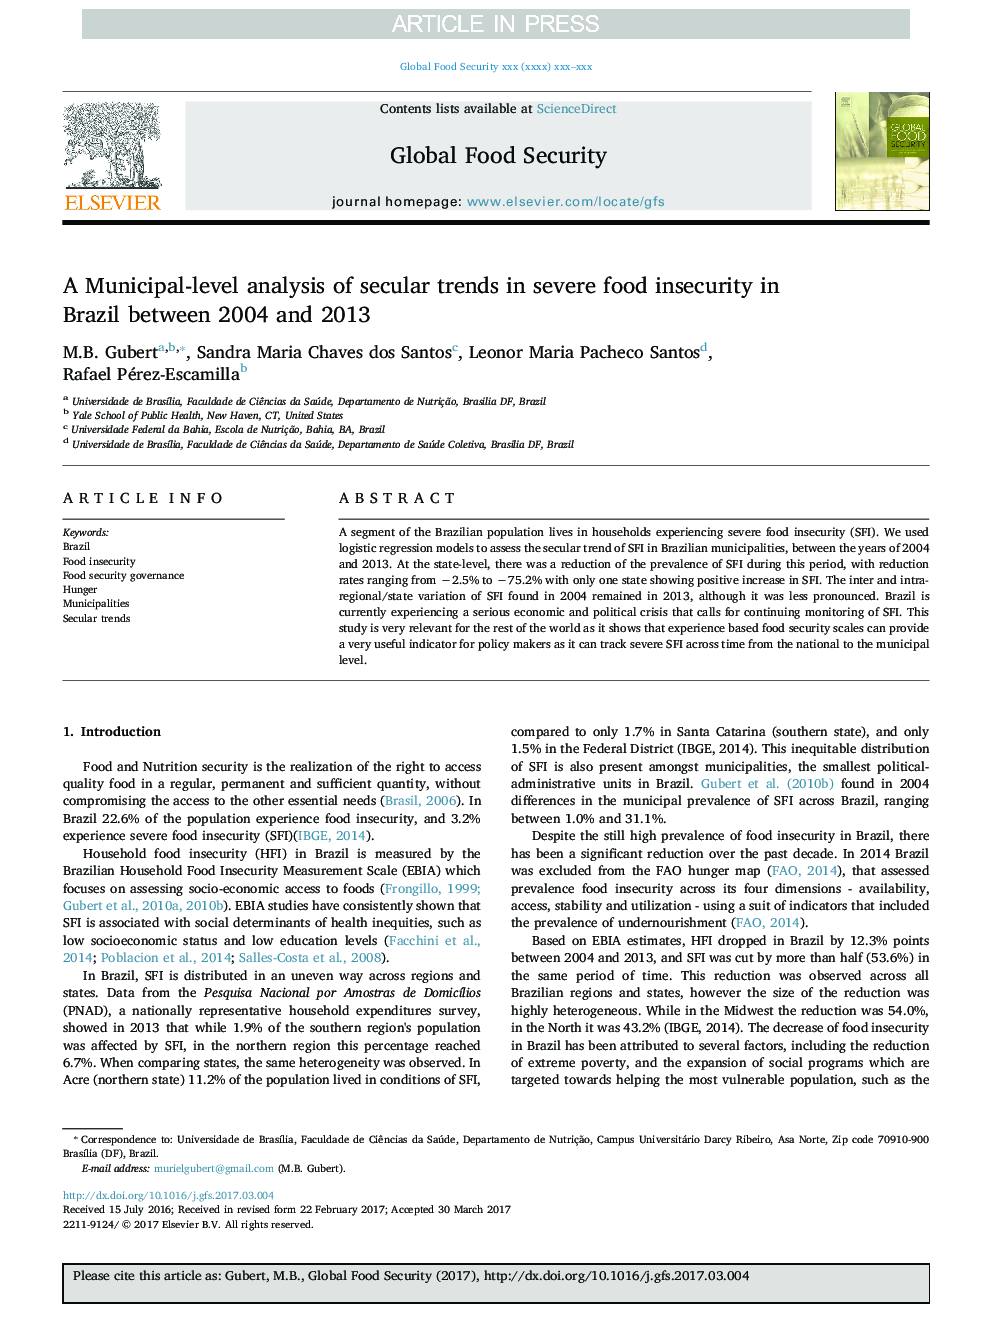 A Municipal-level analysis of secular trends in severe food insecurity in Brazil between 2004 and 2013